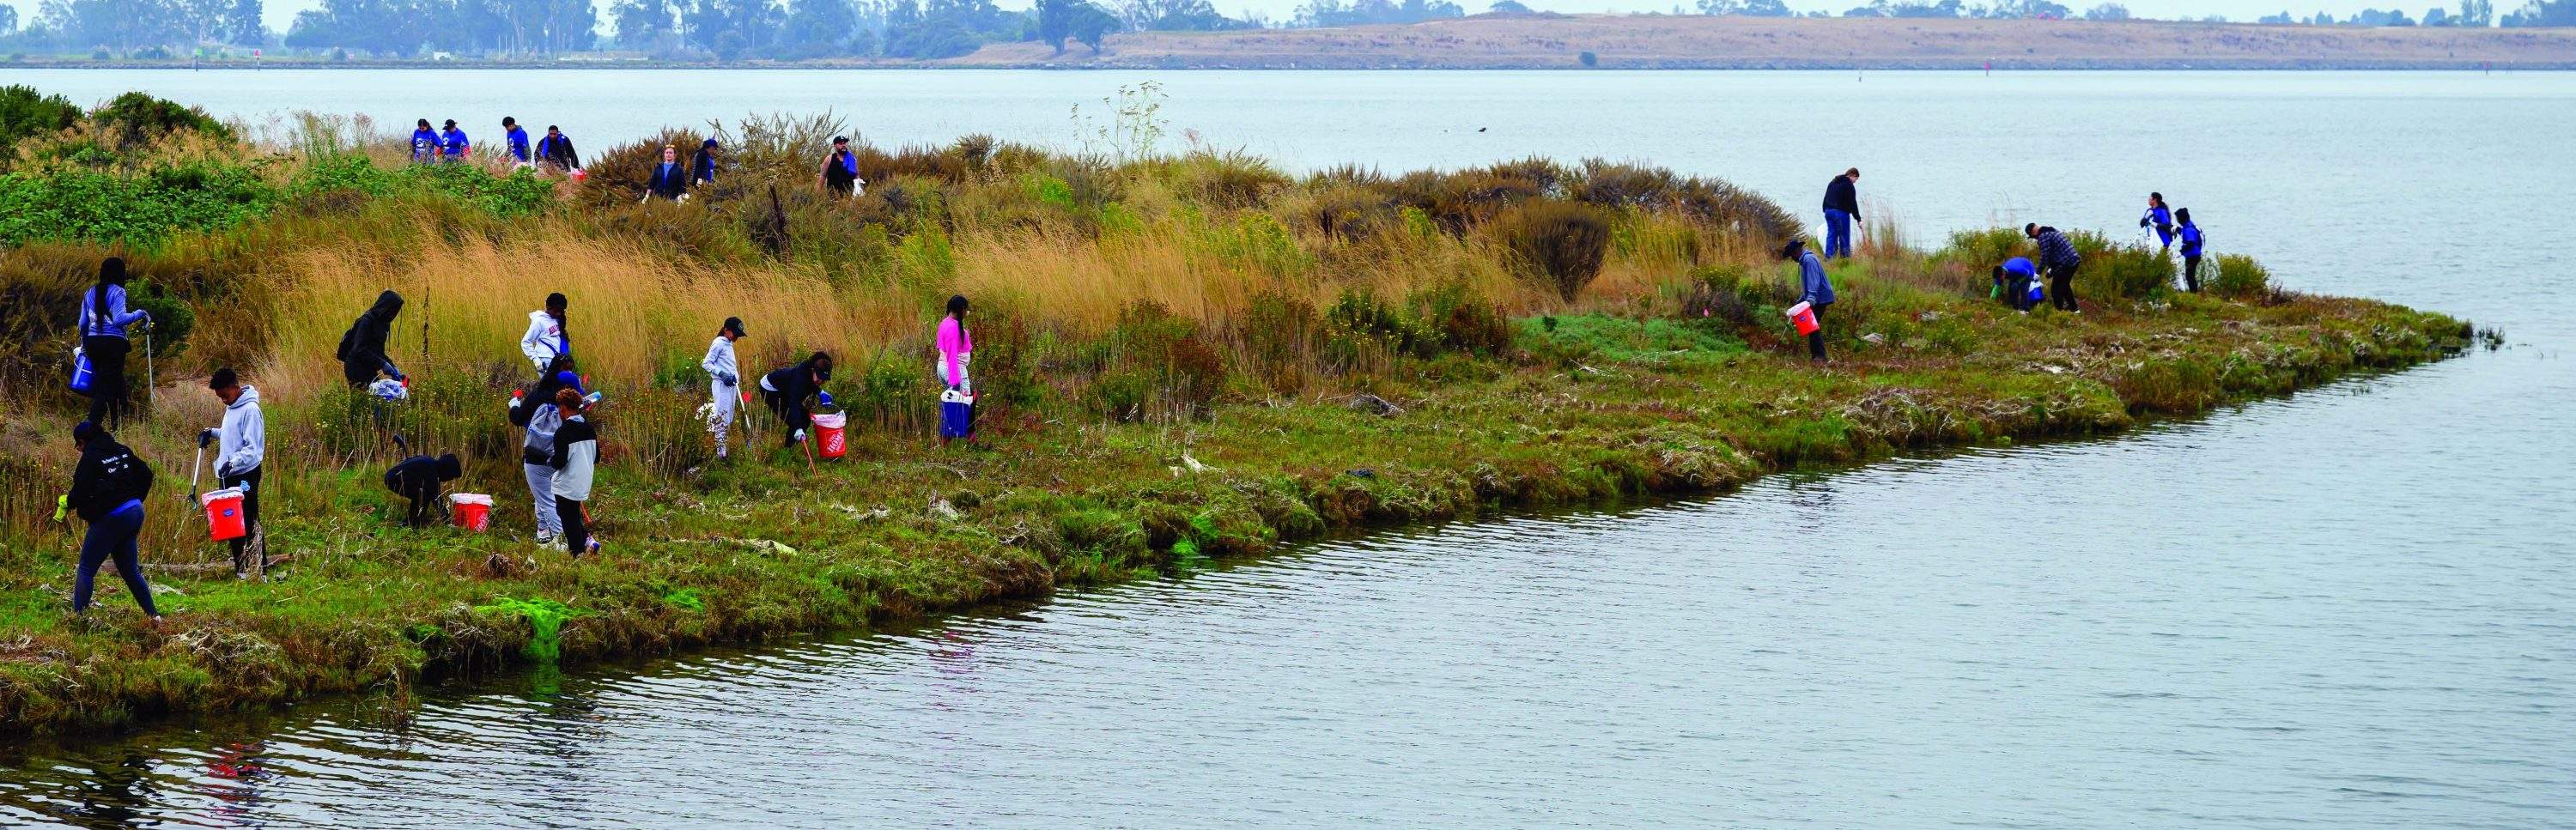 Volunteers equipped with grabbers, bags and buckets dot the estuary cleaning up trash.